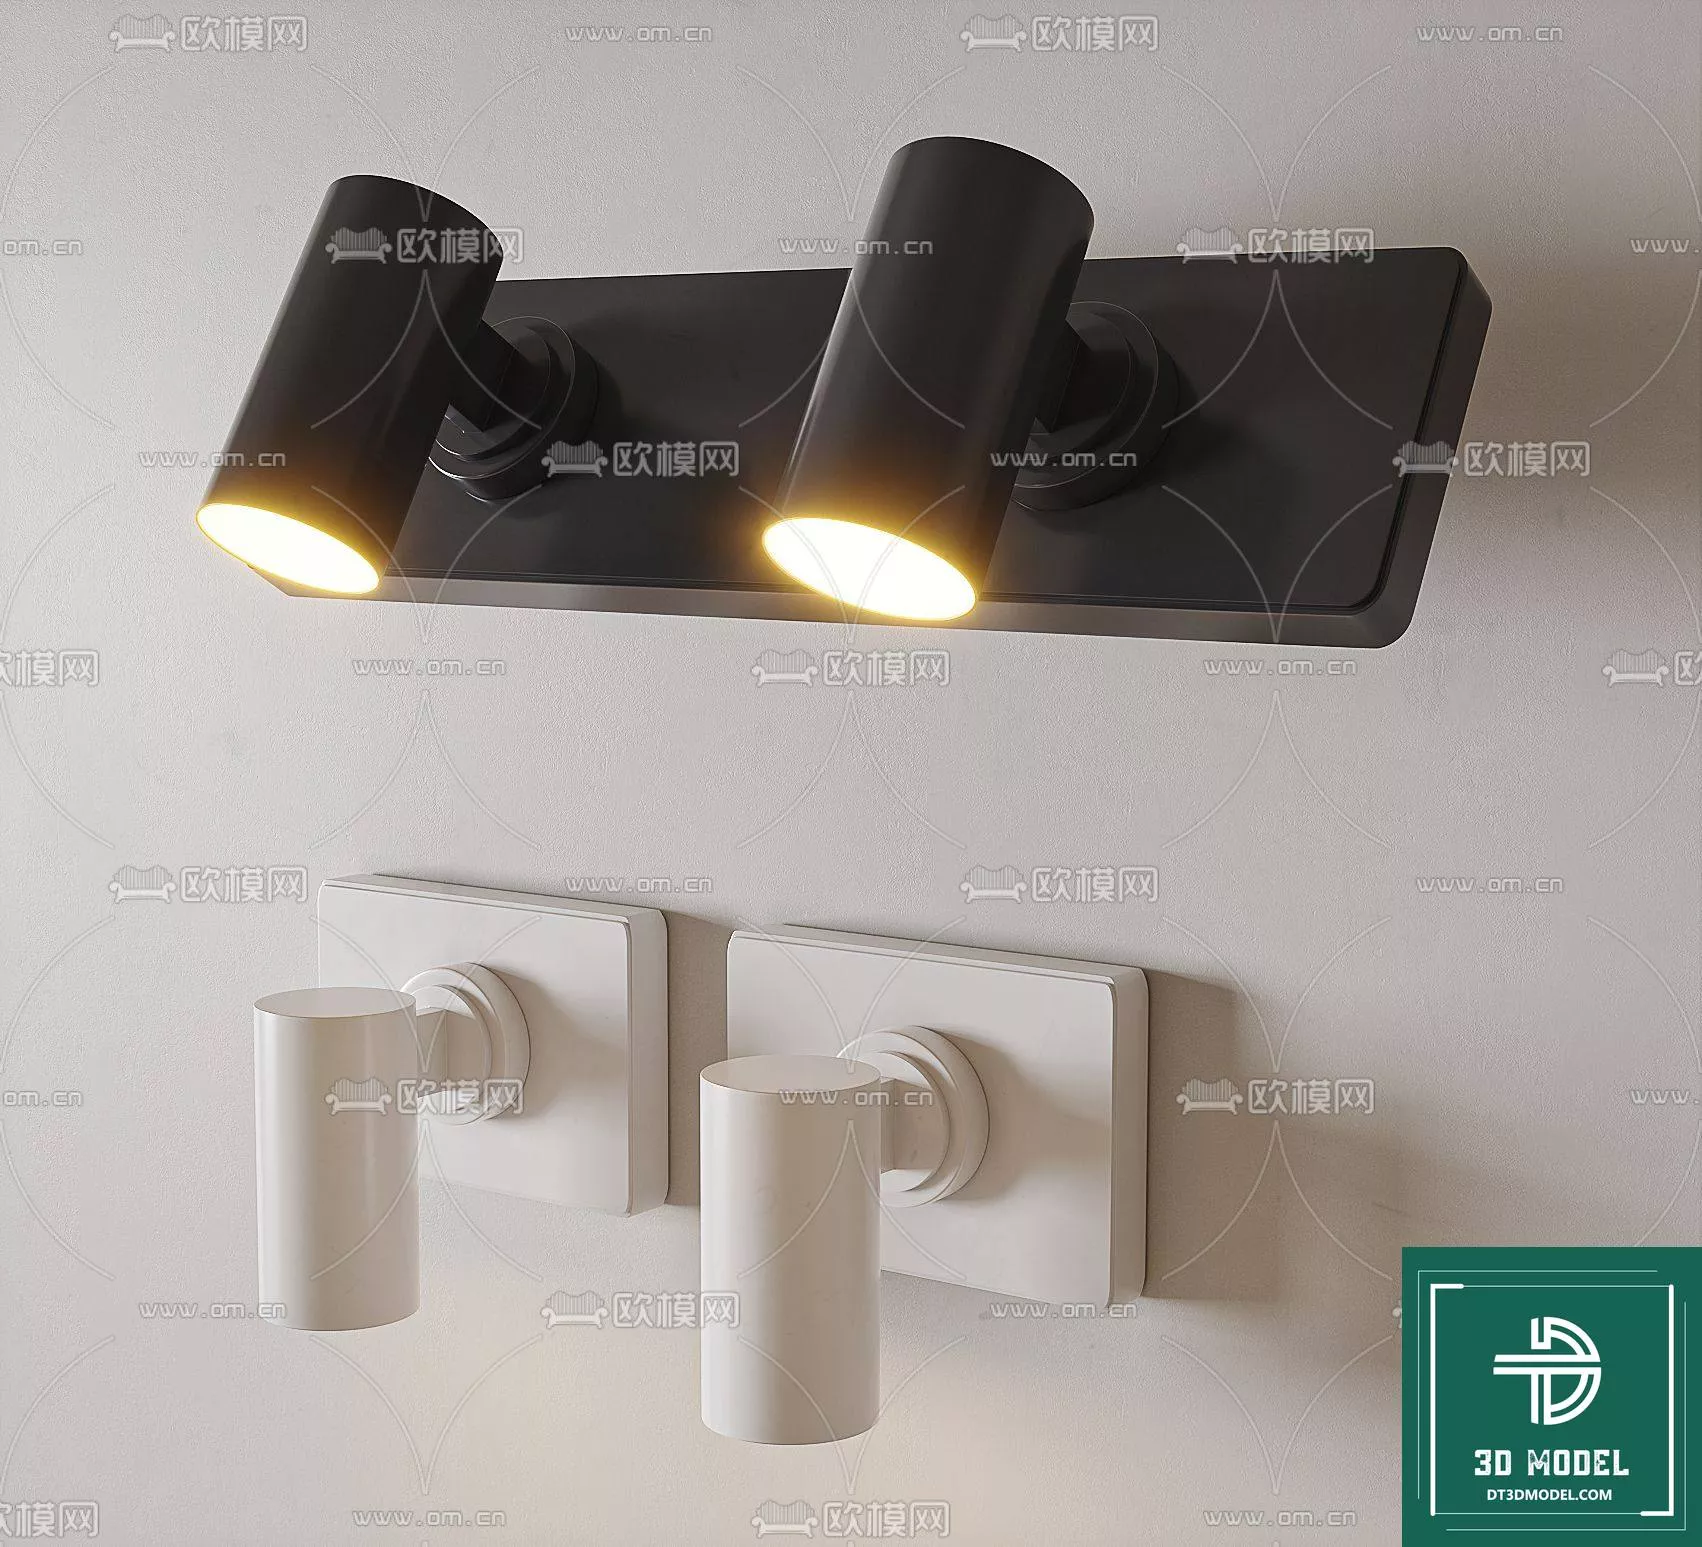 MODERN WALL LAMP - SKETCHUP 3D MODEL - VRAY OR ENSCAPE - ID16089